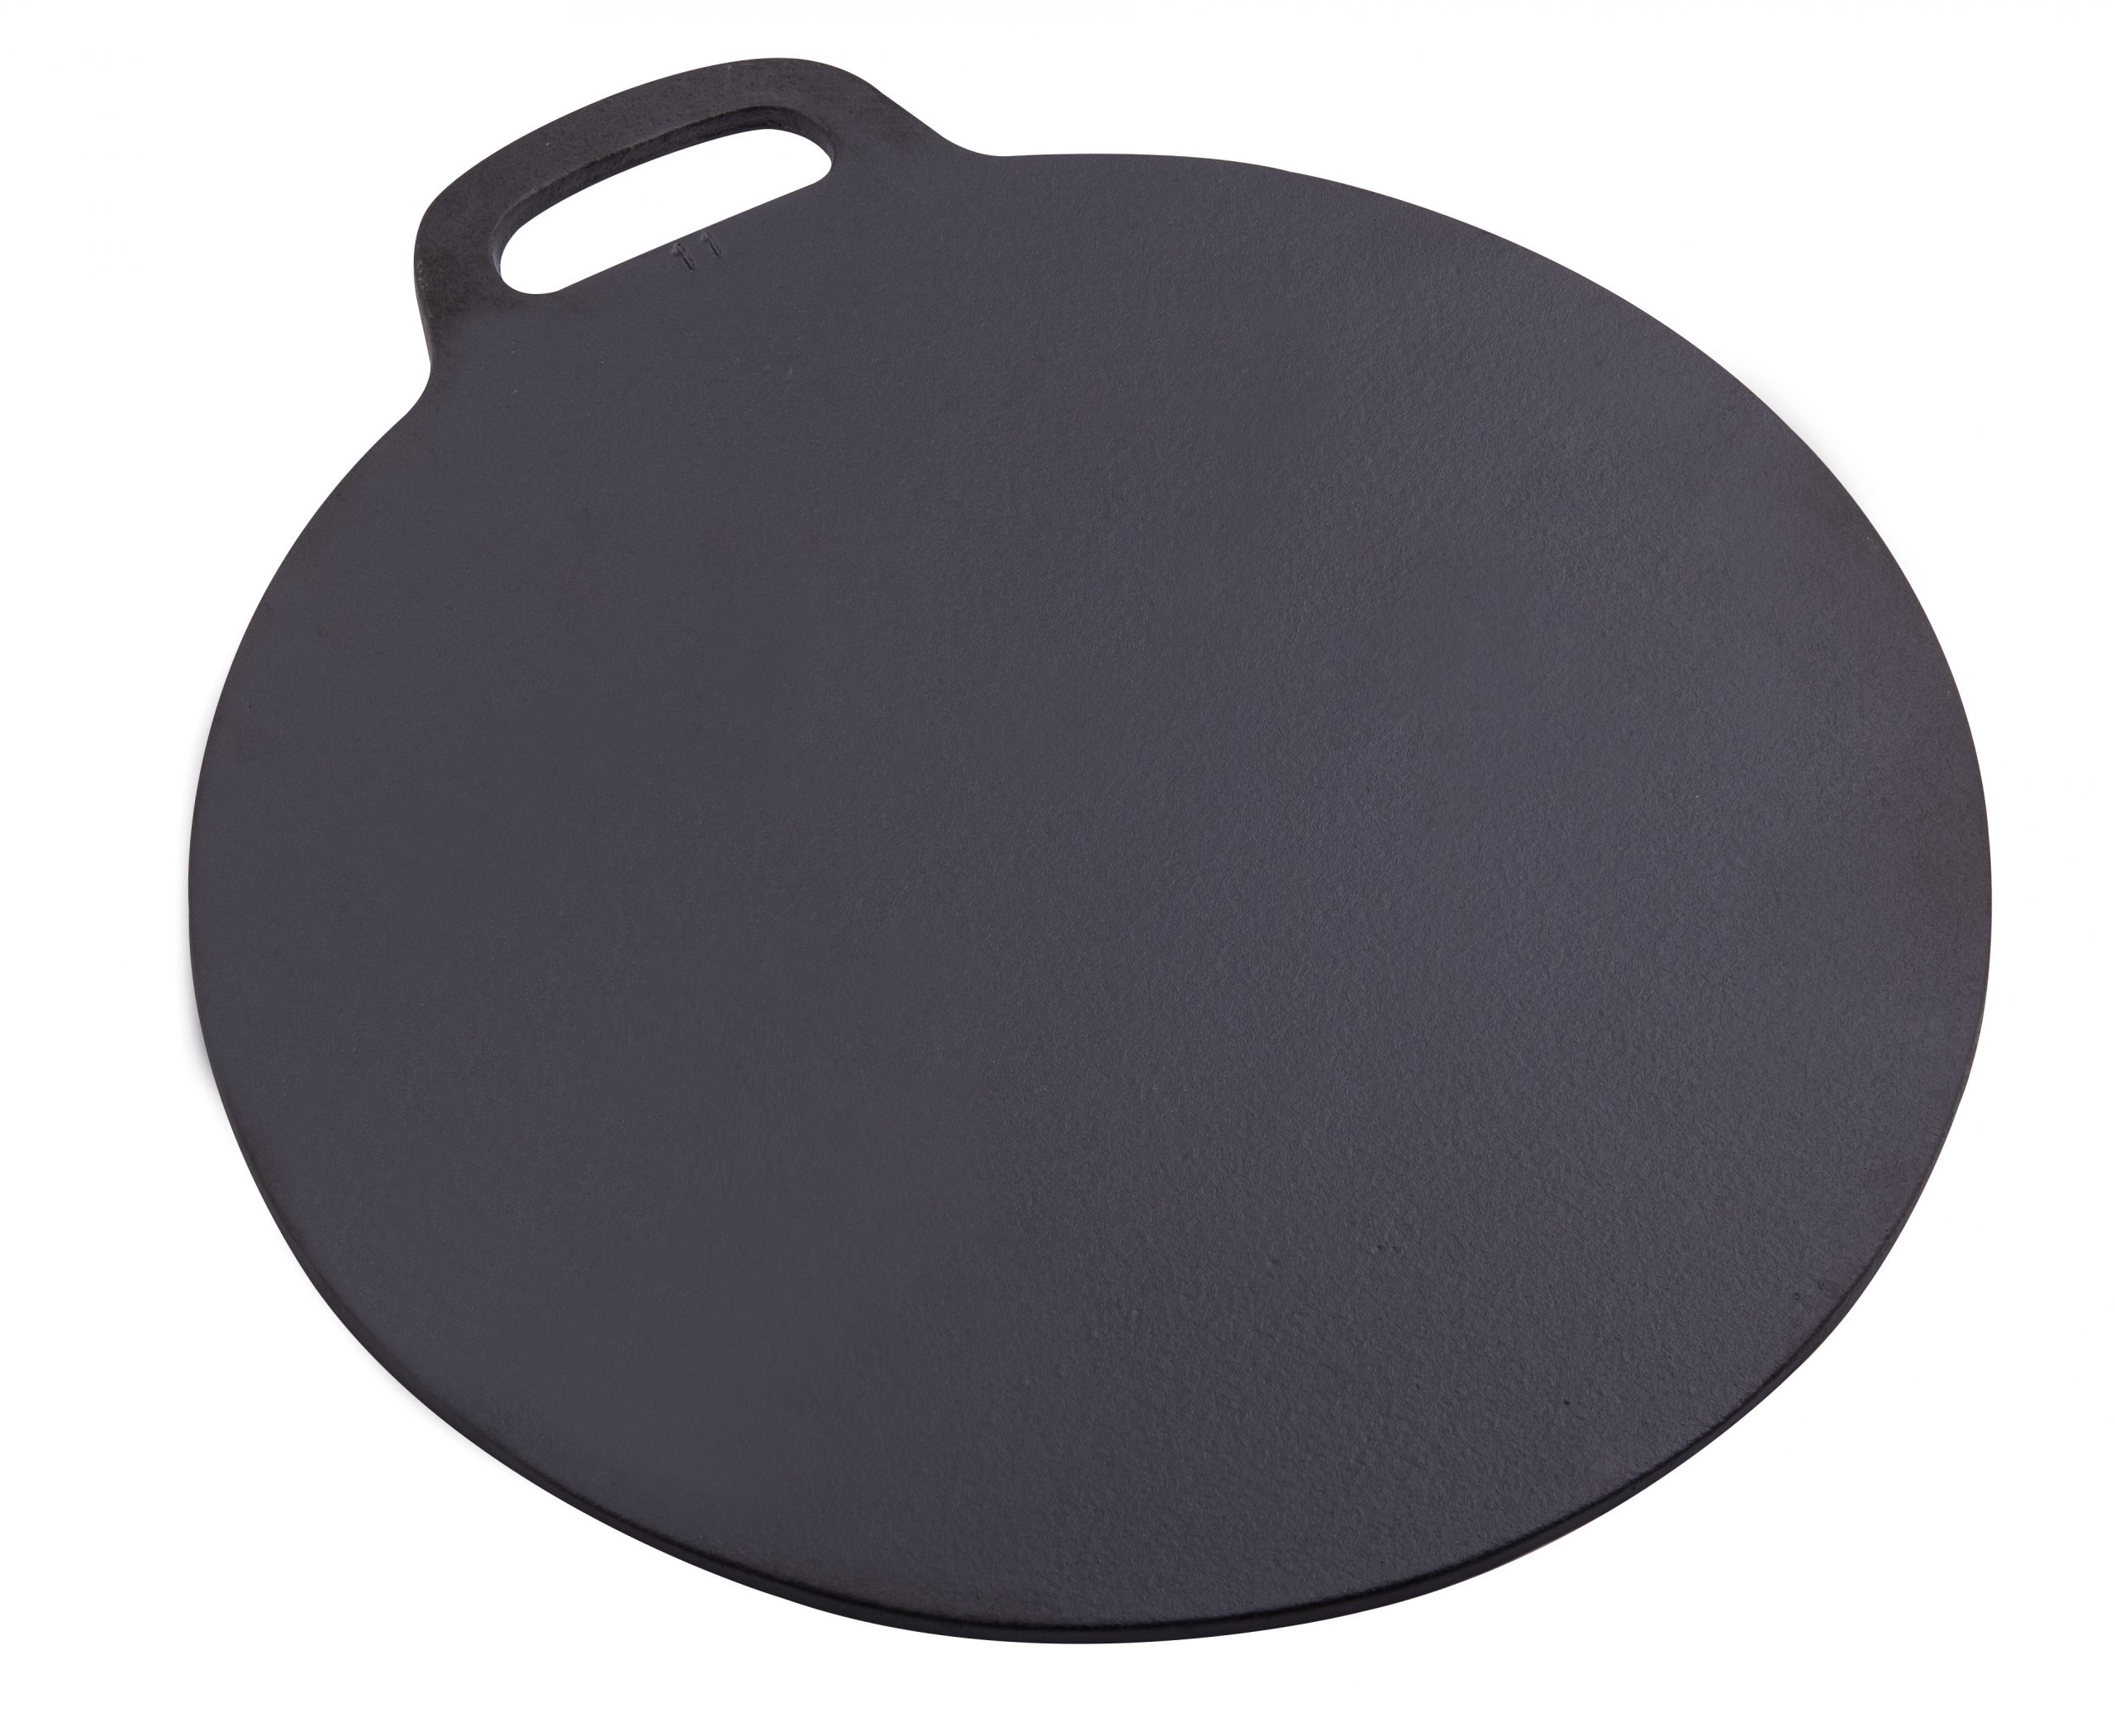 Comal Comalli Pizza Stone made from volcanic rock 14.5 Inches